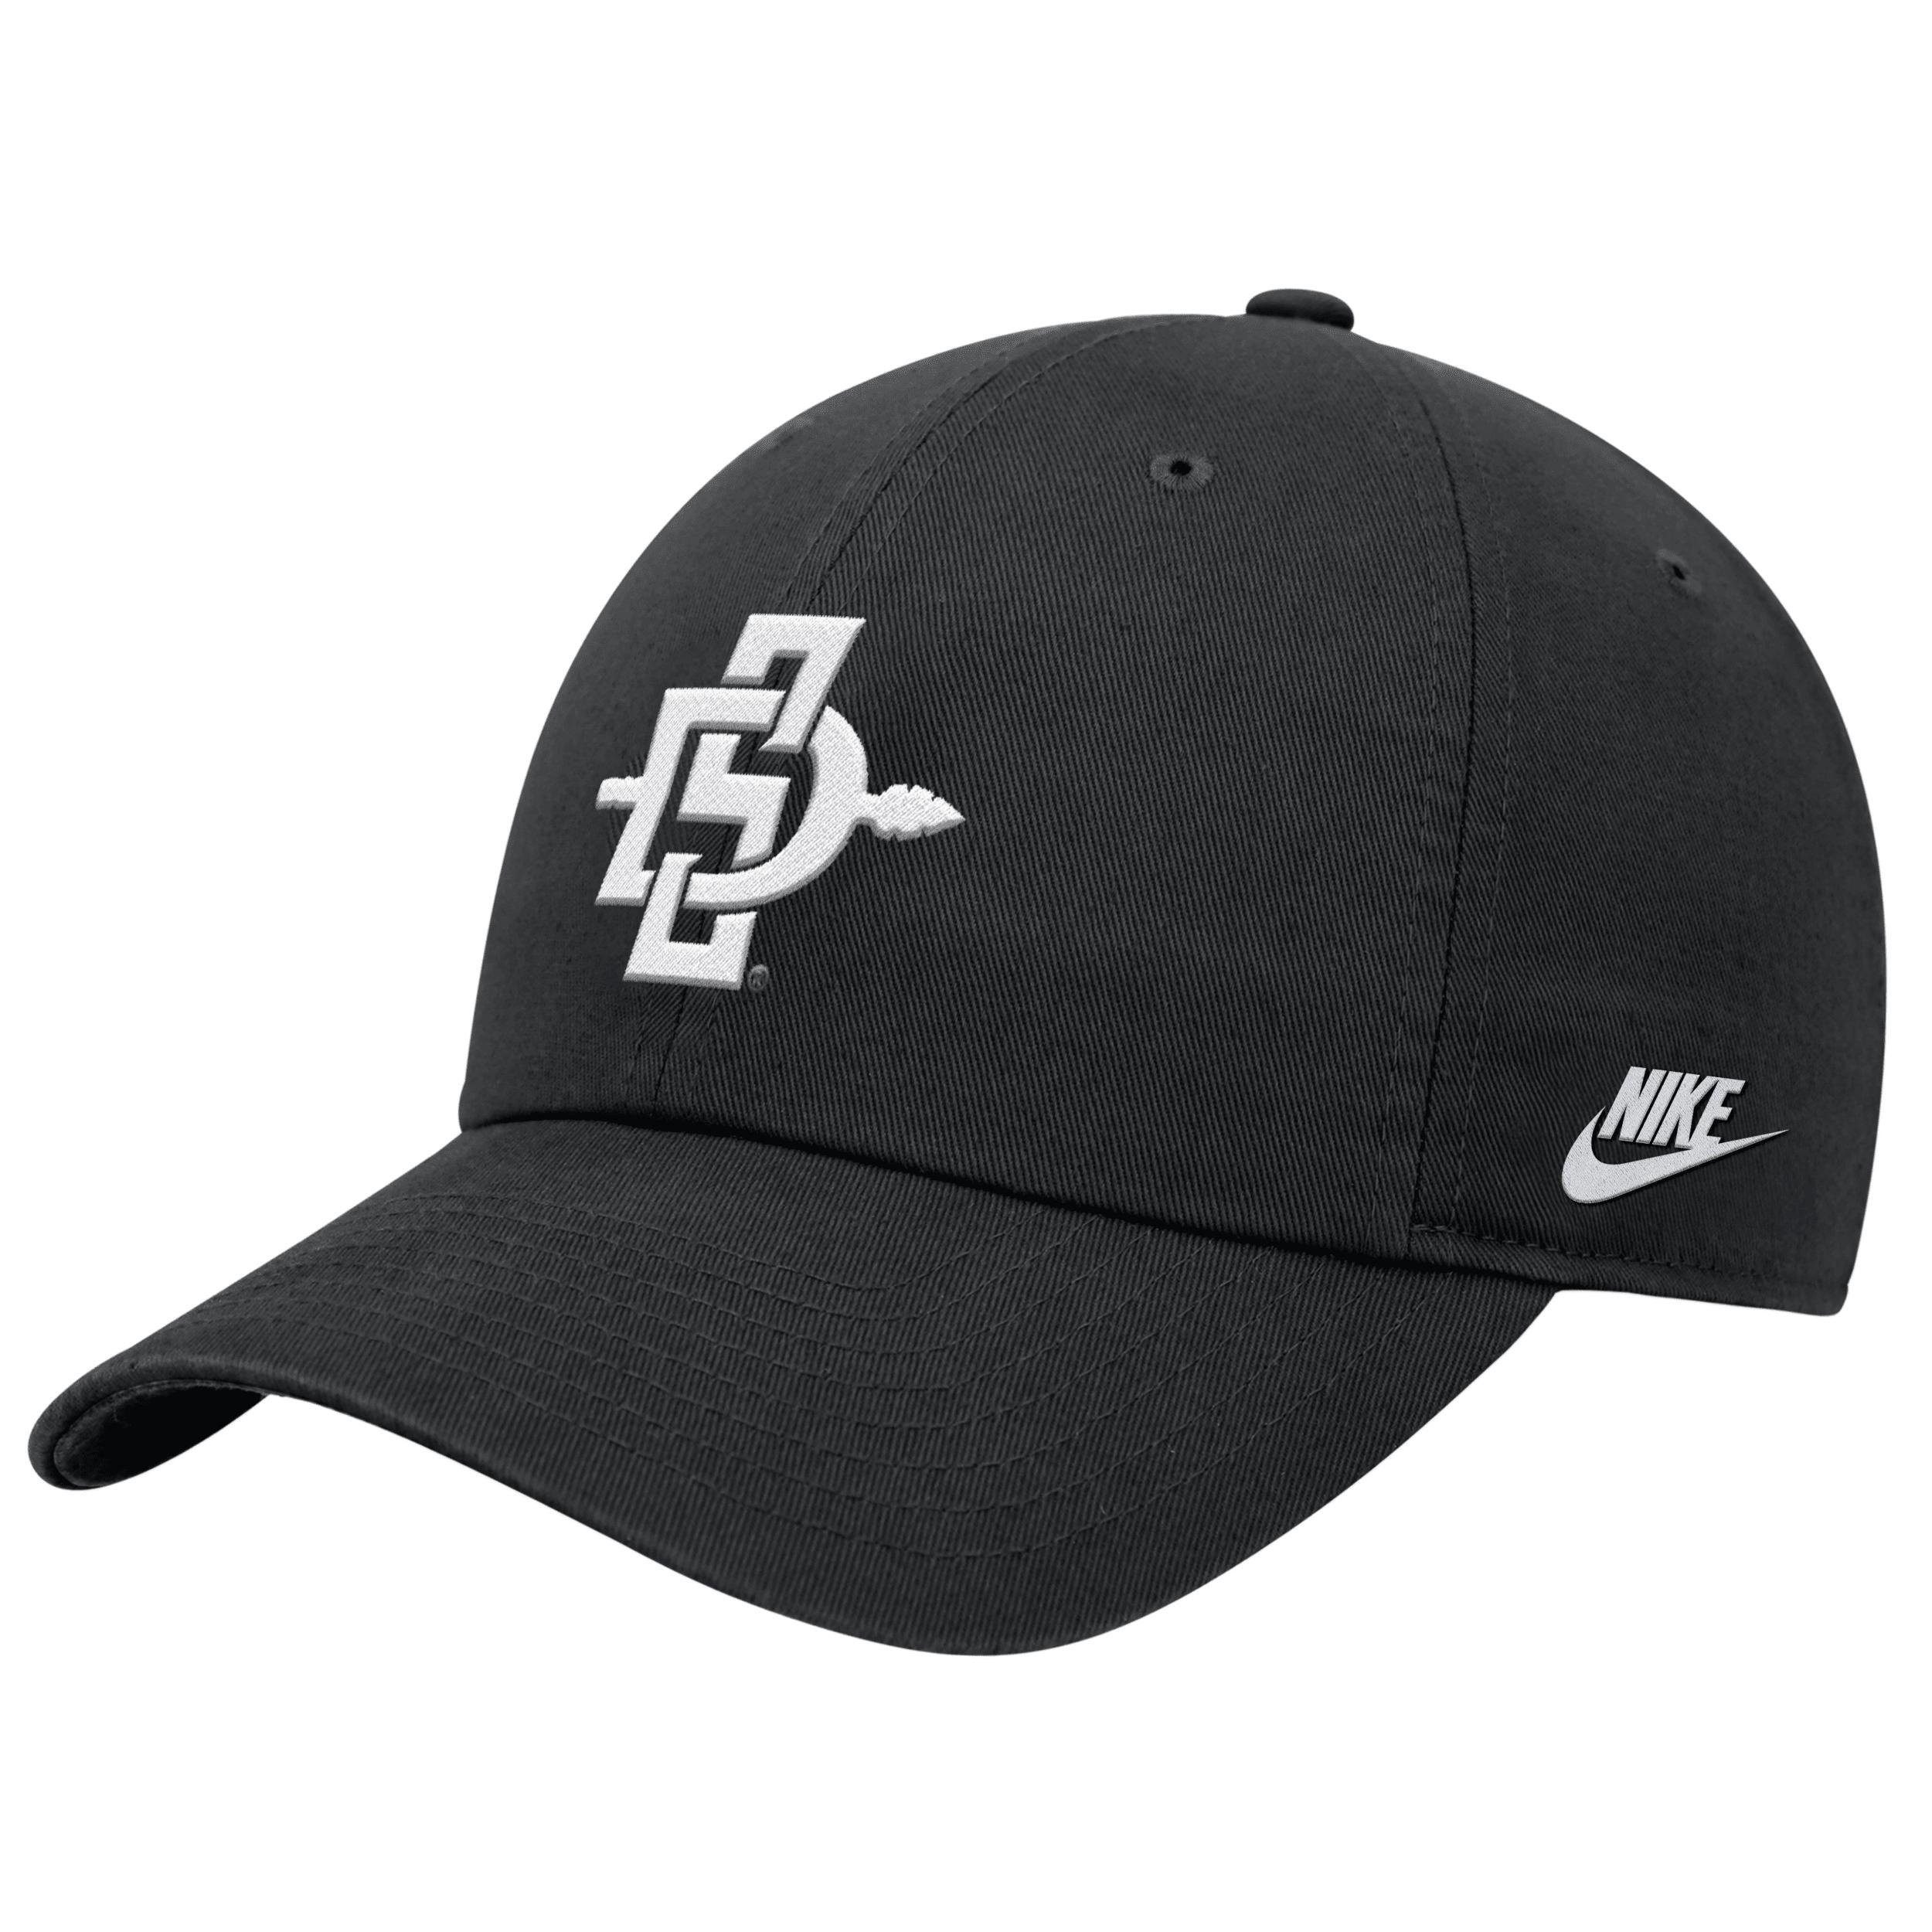 San Diego State Nike Unisex College Cap by NIKE